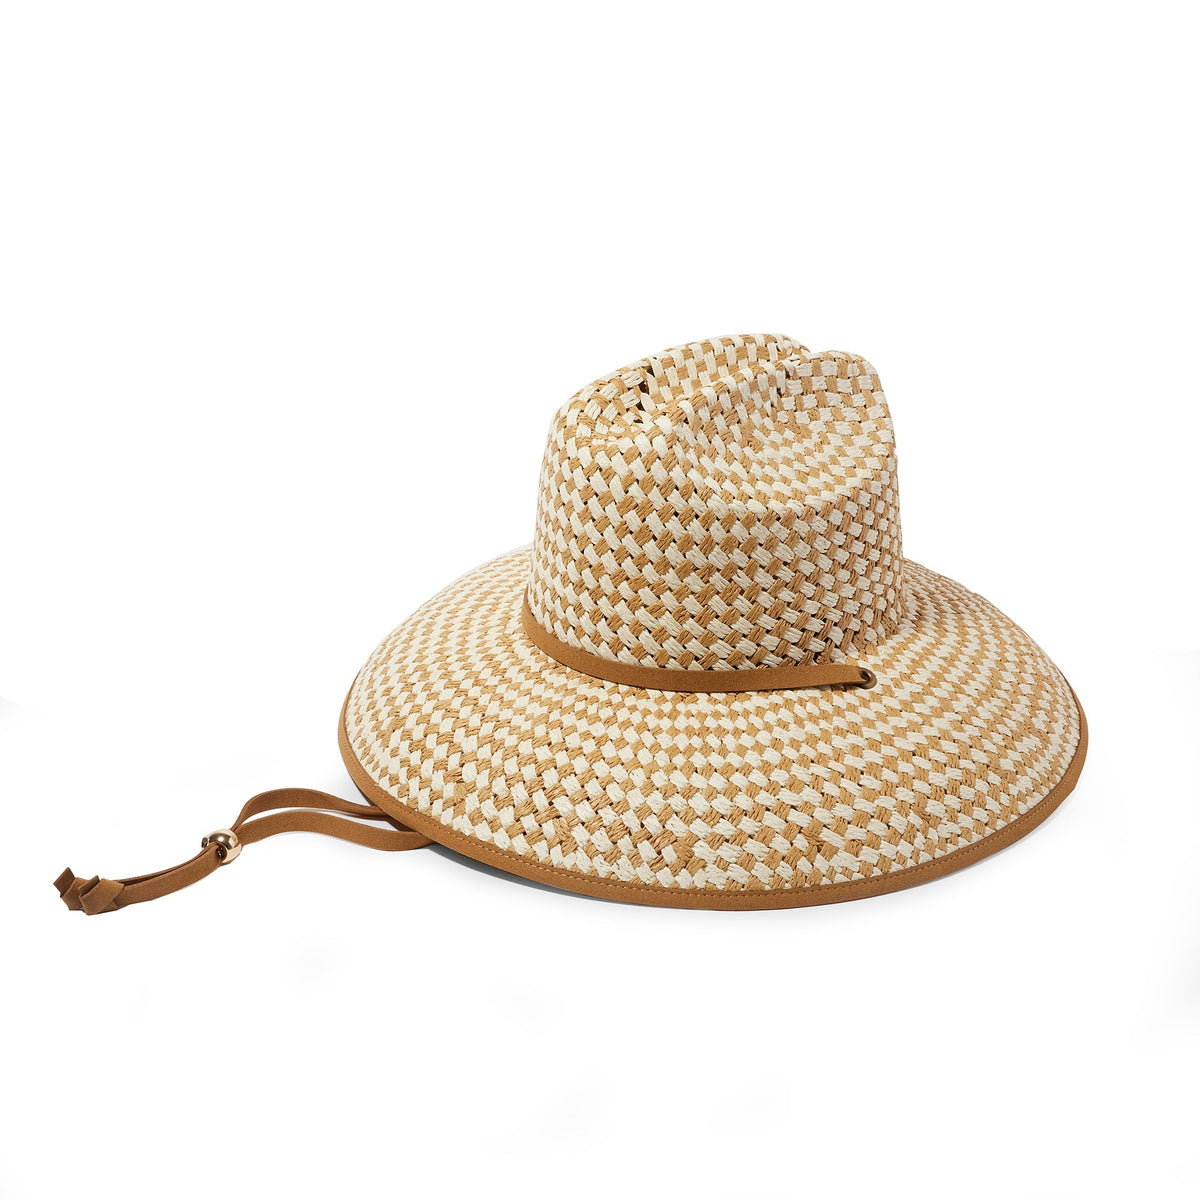 Lele Sadoughi HATS ONE SIZE / NATURAL NATURAL STRAW CHECKERED HAT